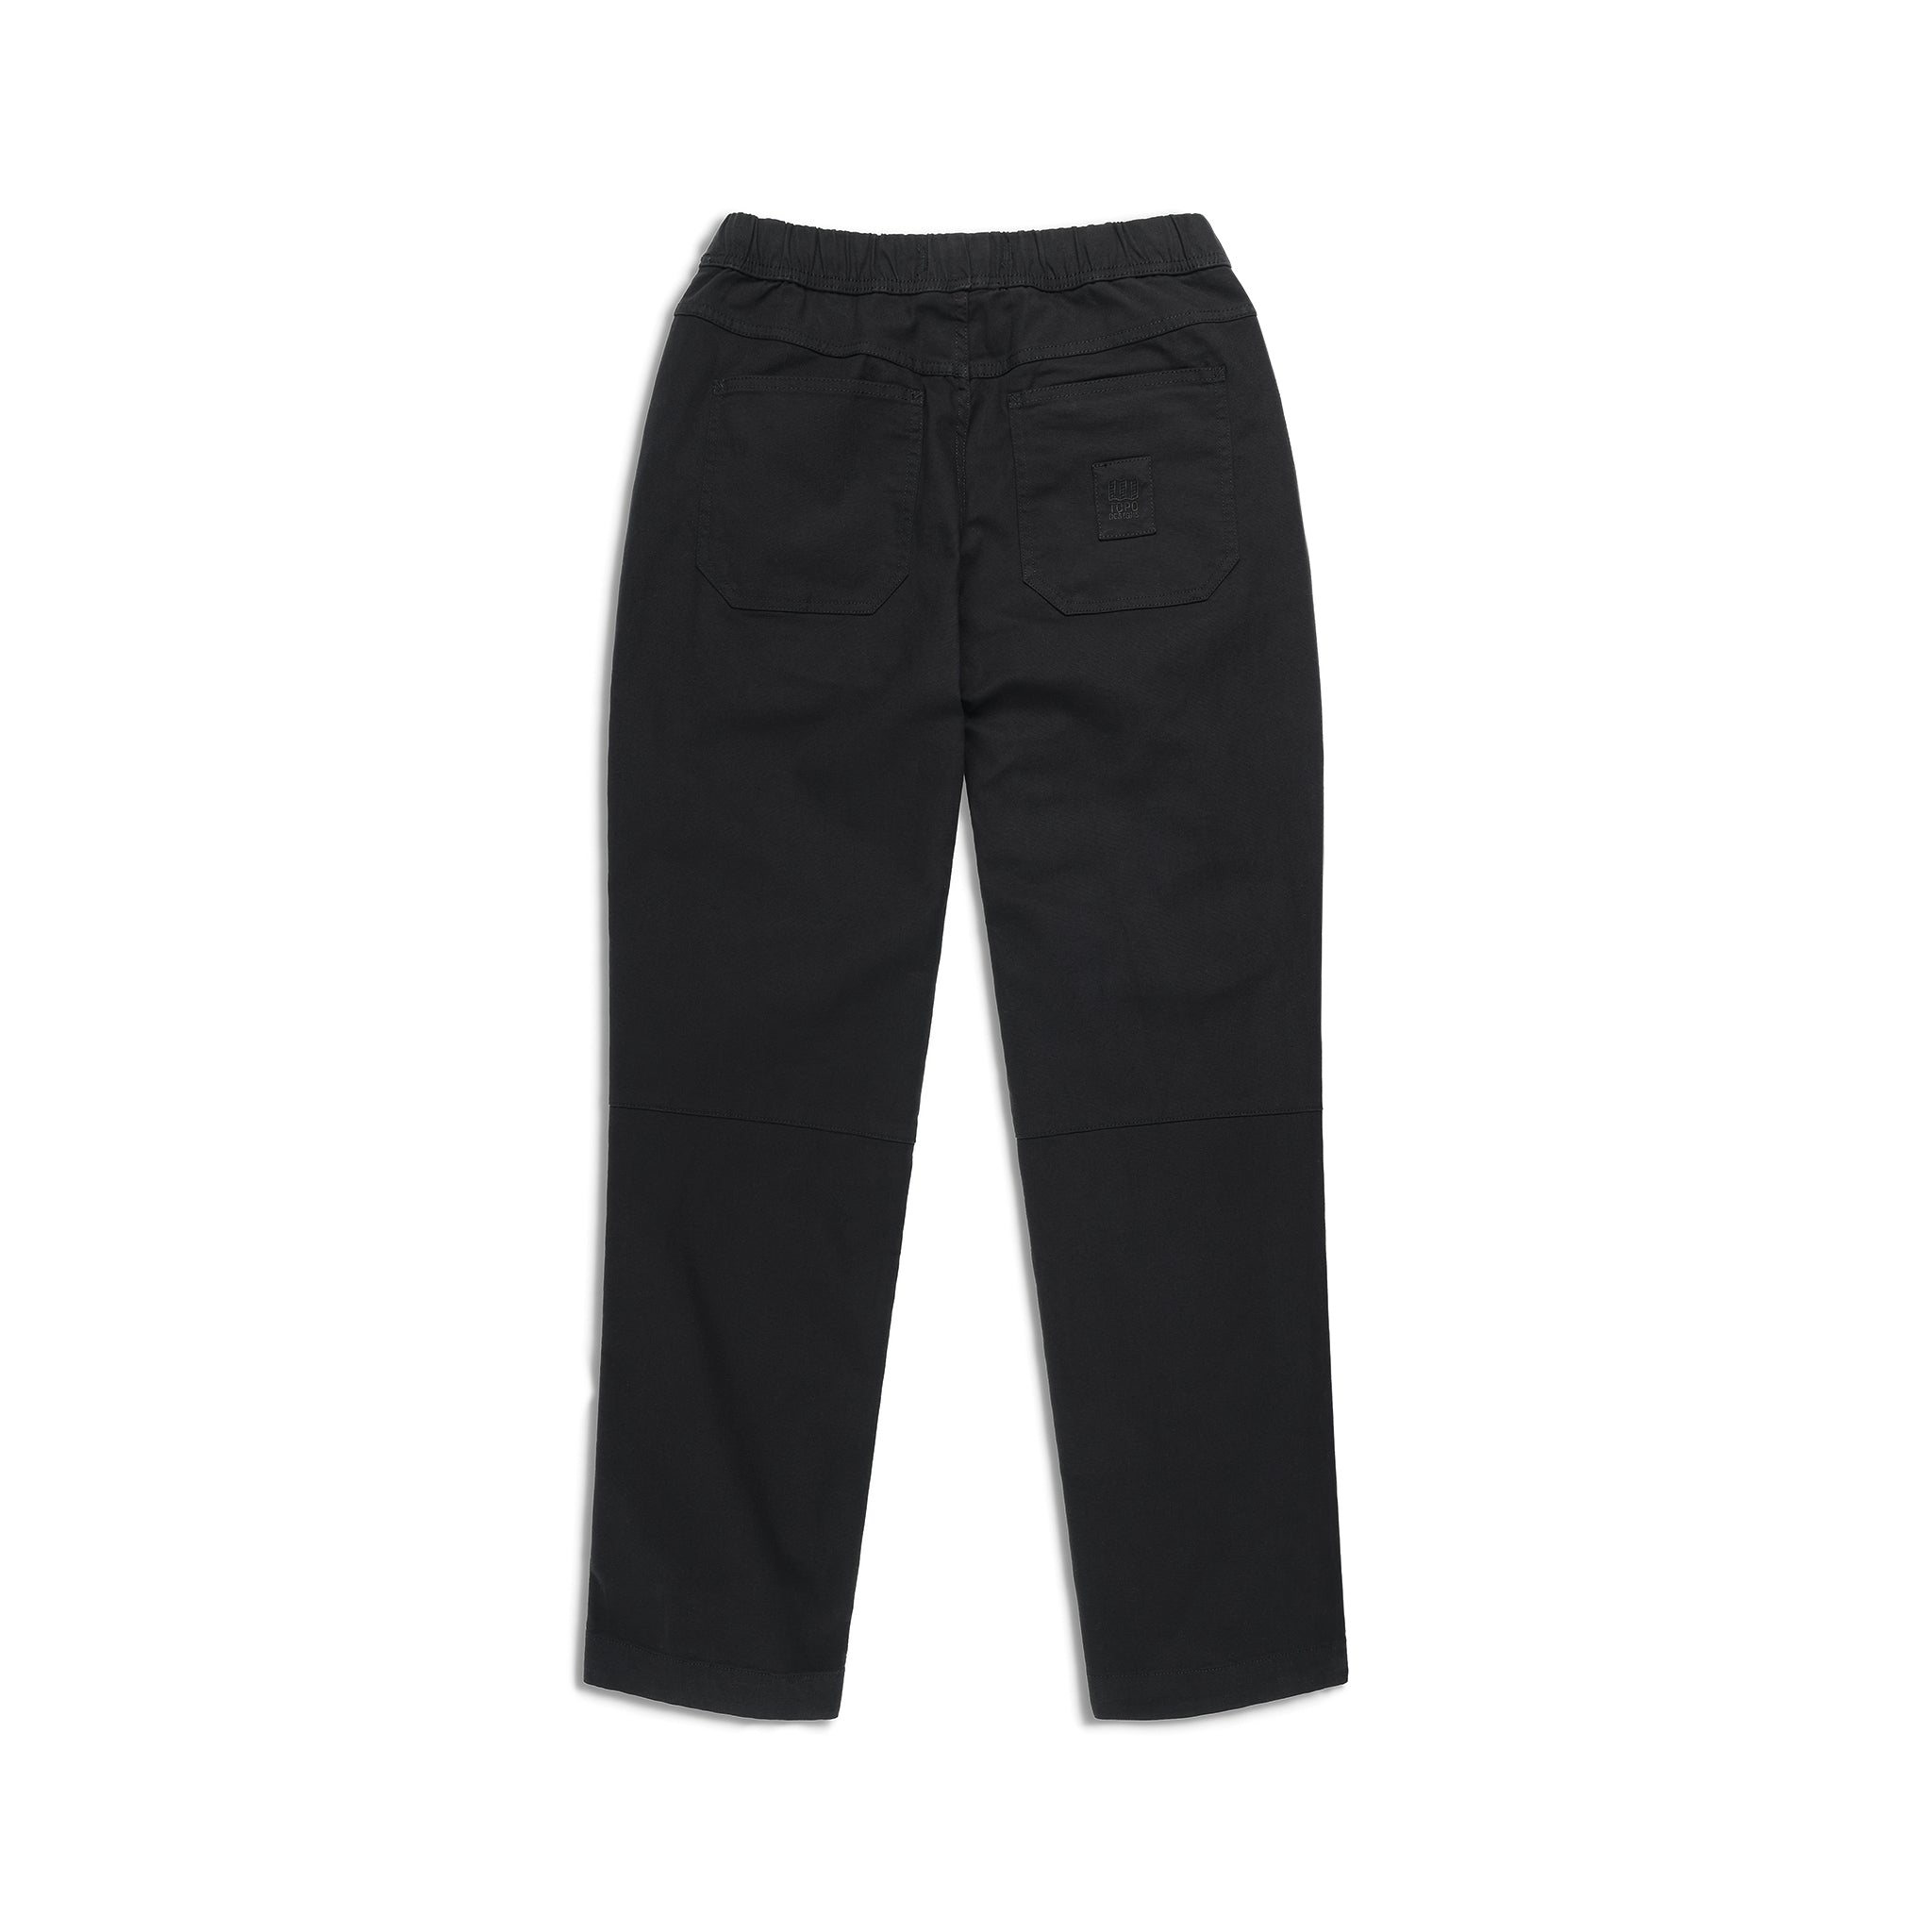 Energy Zone Women's Cotton Stretch Pocket Pant, Charcoal Heather, Small at   Women's Clothing store